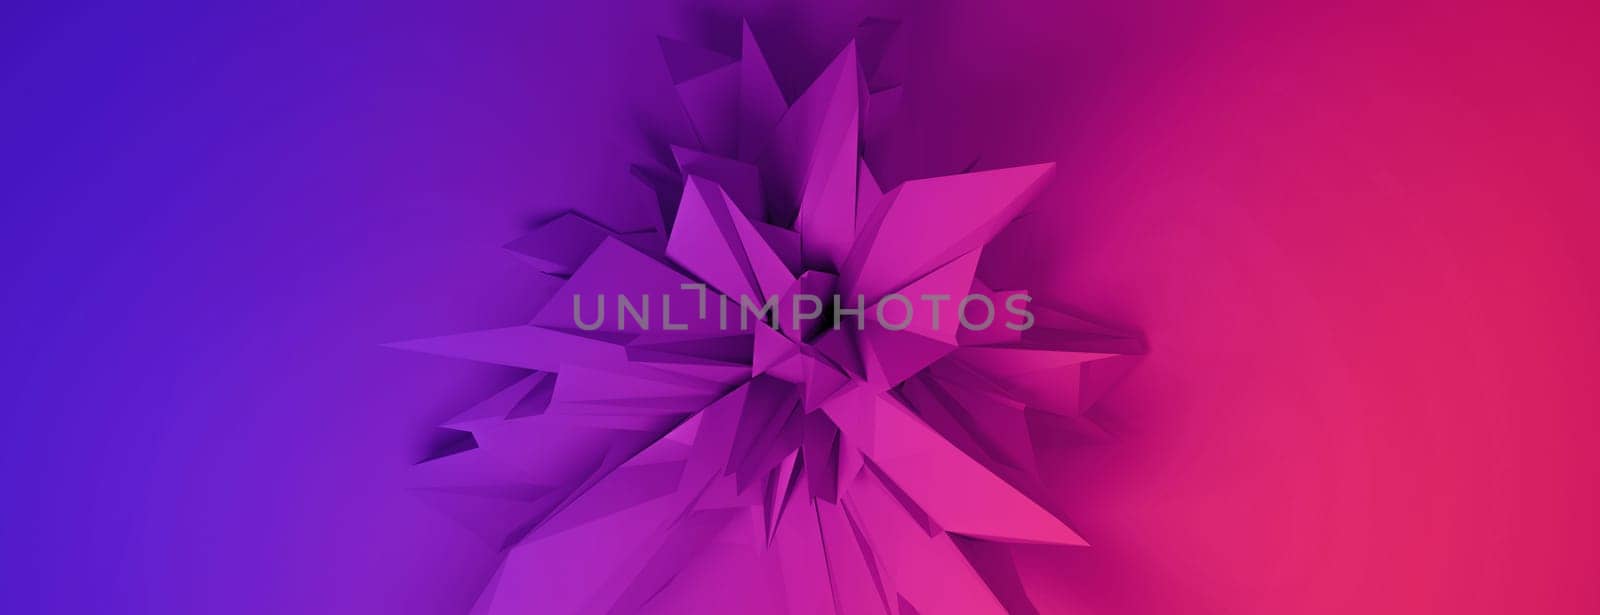 Versus on abstract shape on gradient background. Competition concept. by ImagesRouges